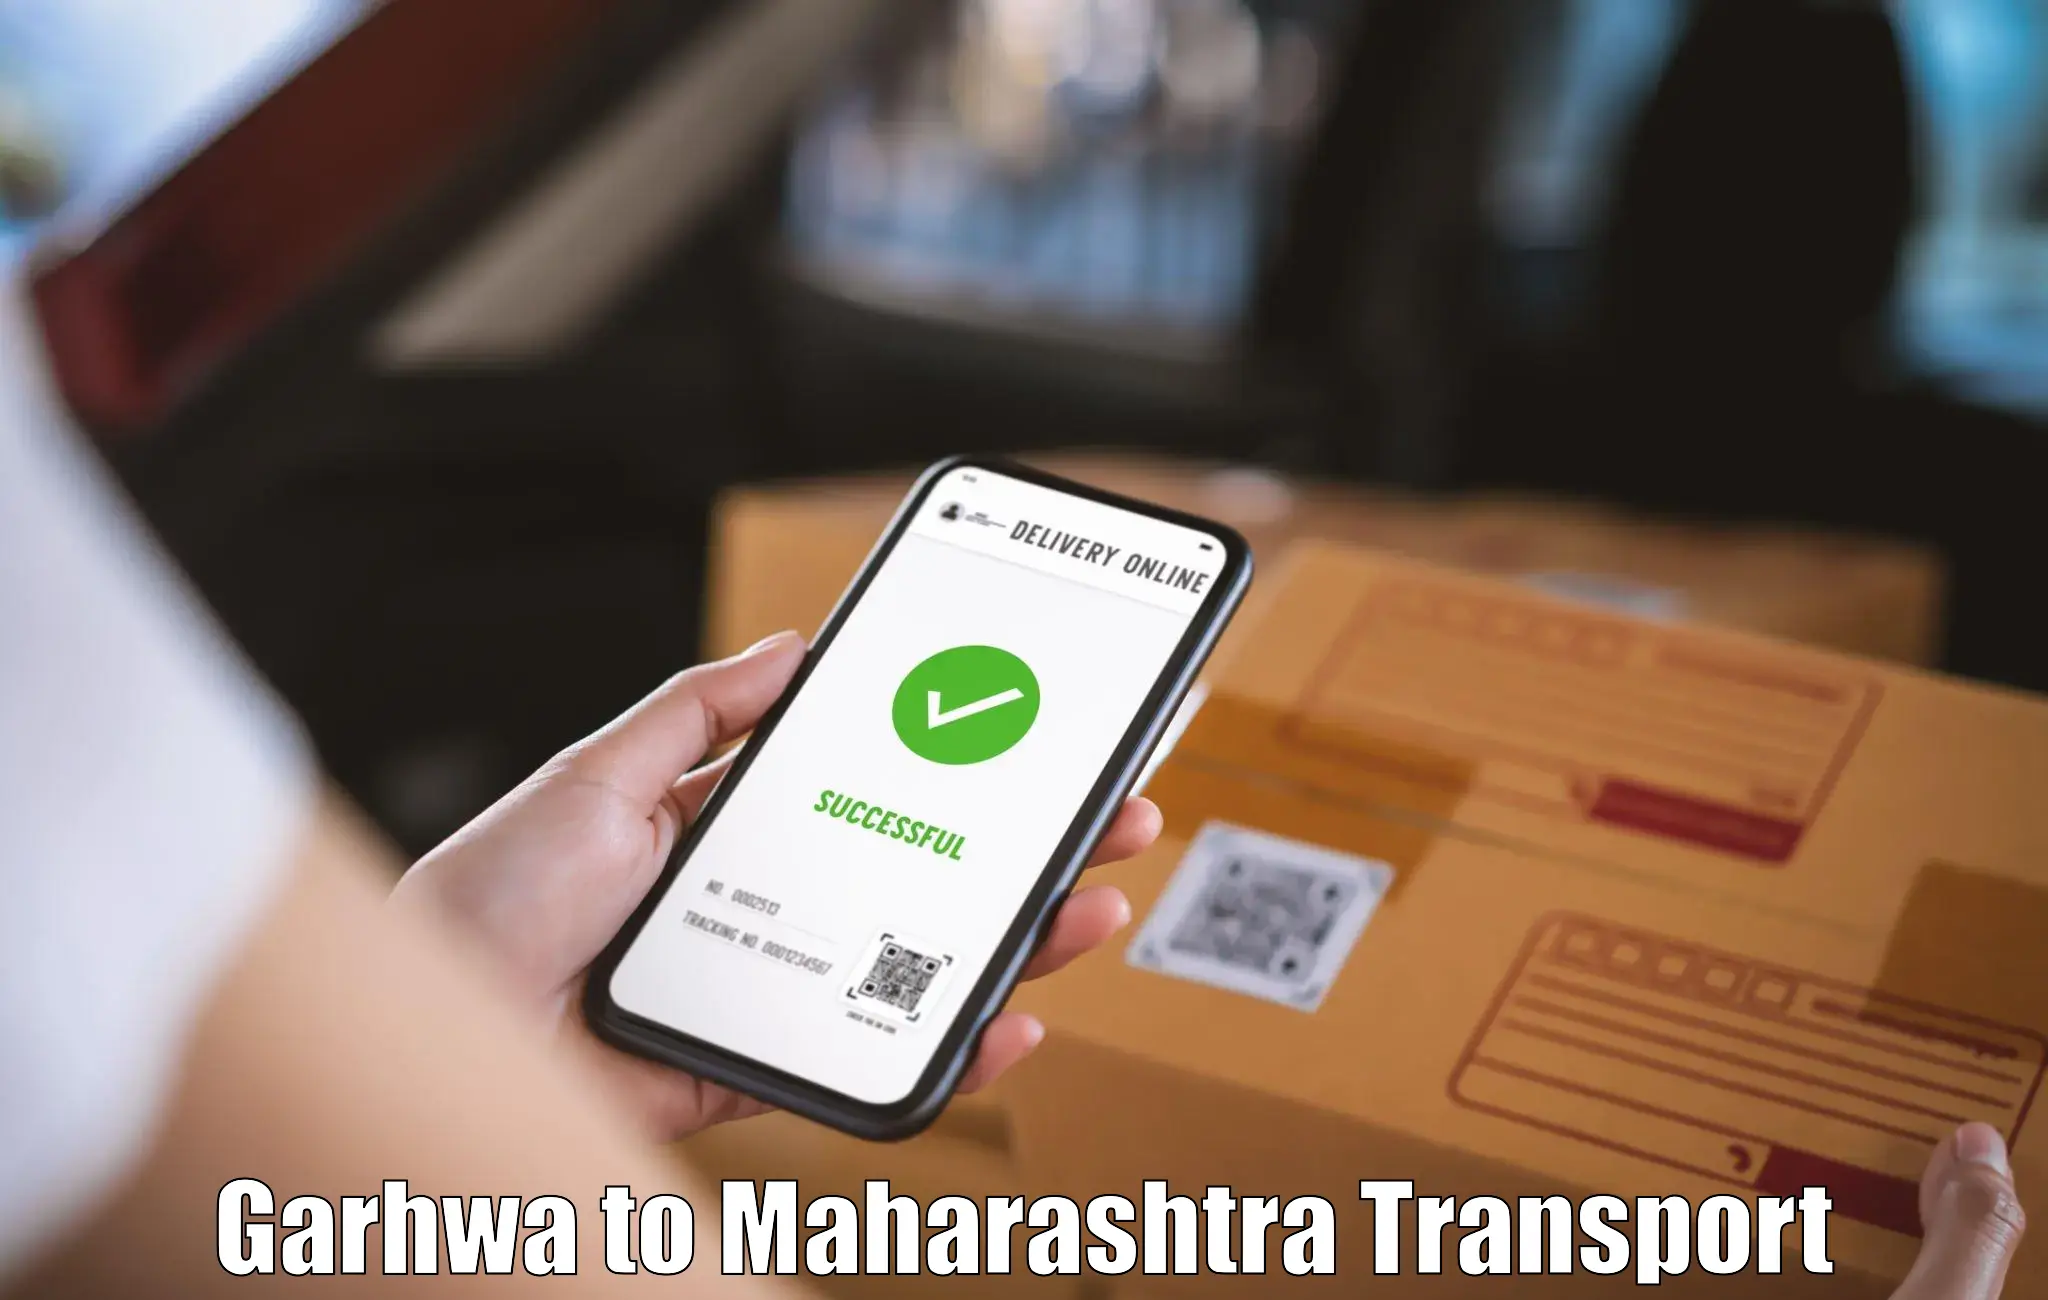 Goods delivery service Garhwa to Koregaon